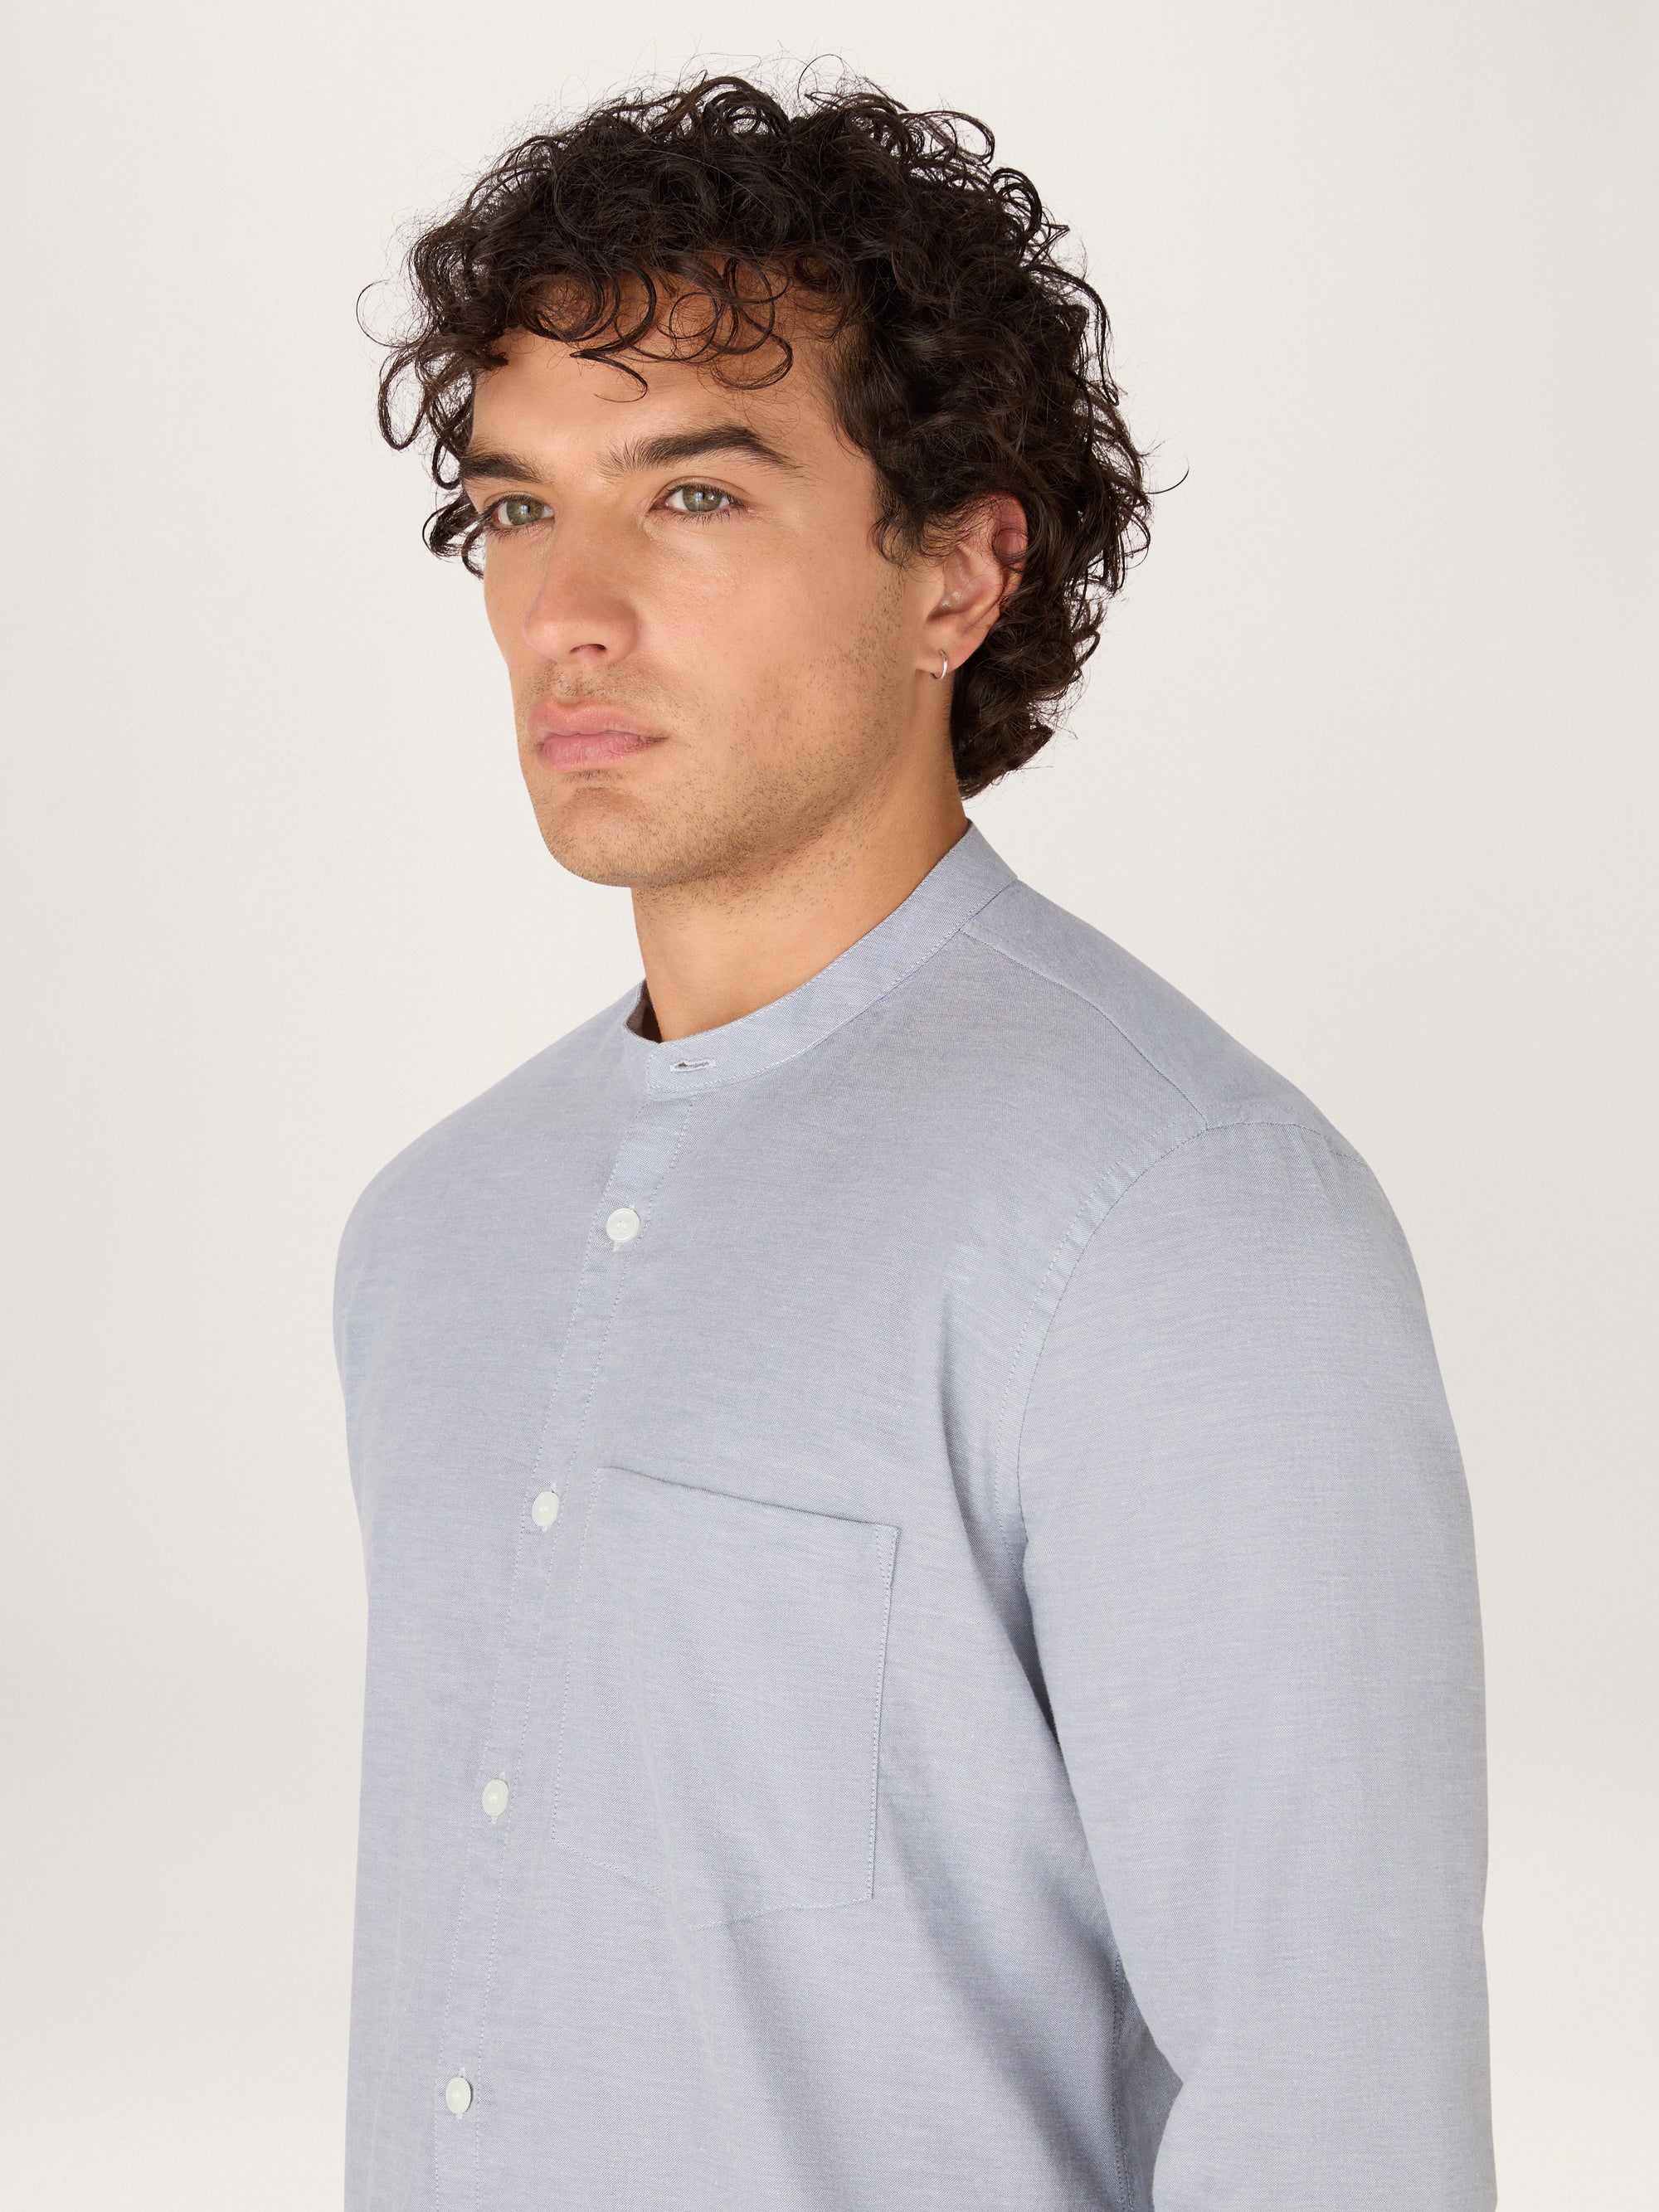 The All Day Shirt || Chambray | Pinpoint Cotton